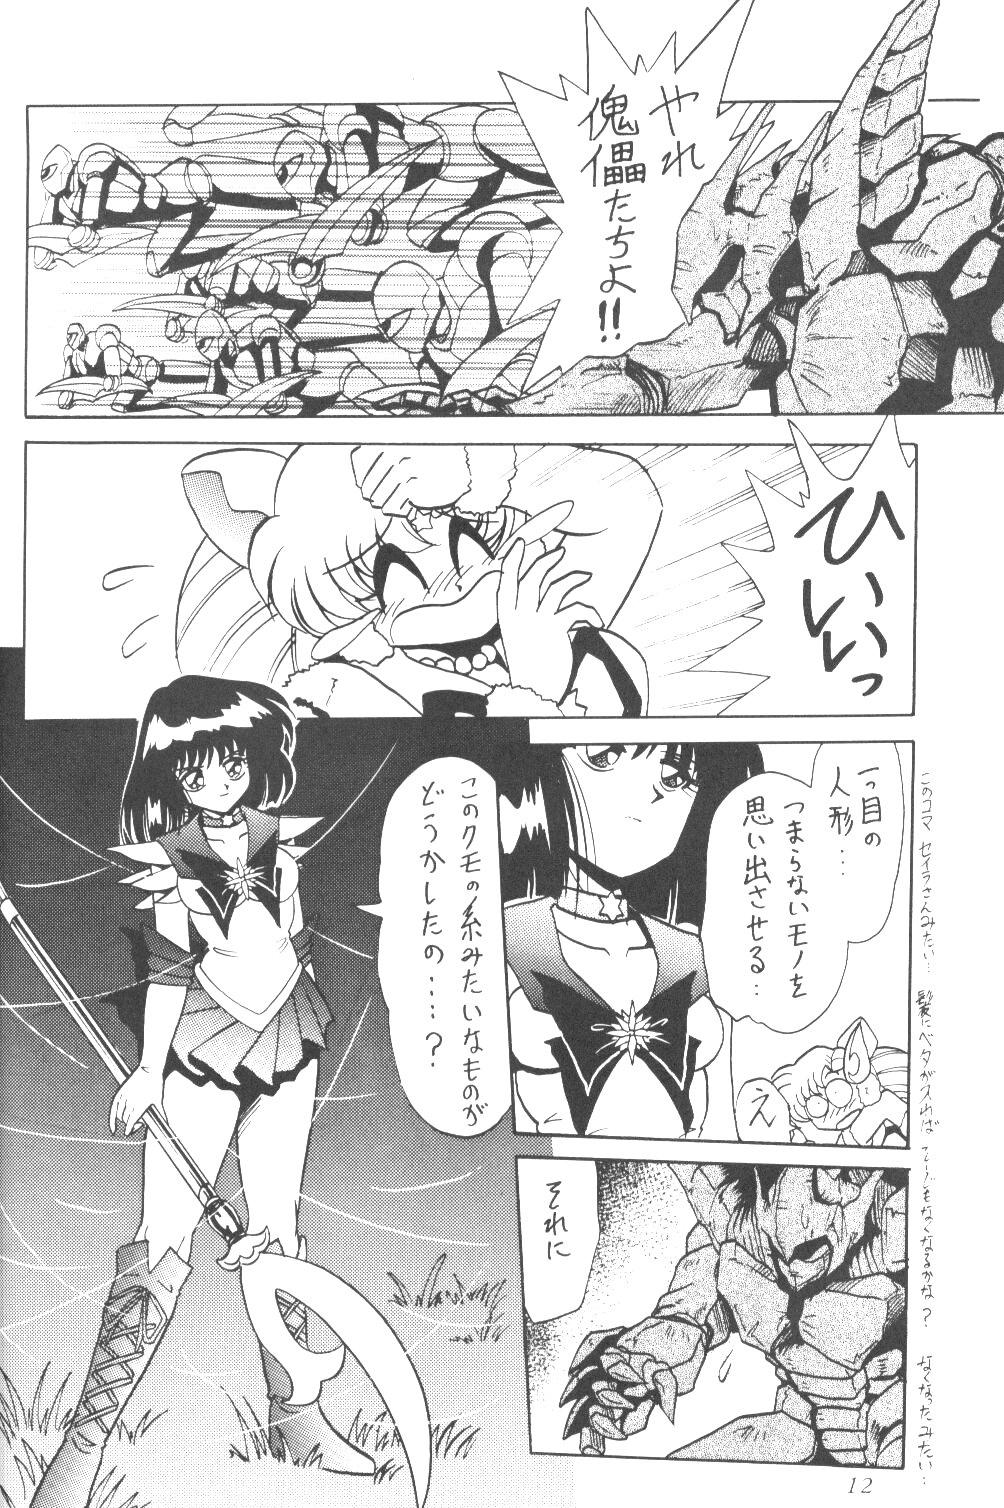 Free Real Porn Silent Saturn SS vol. 3 - Sailor moon Ride - Page 11